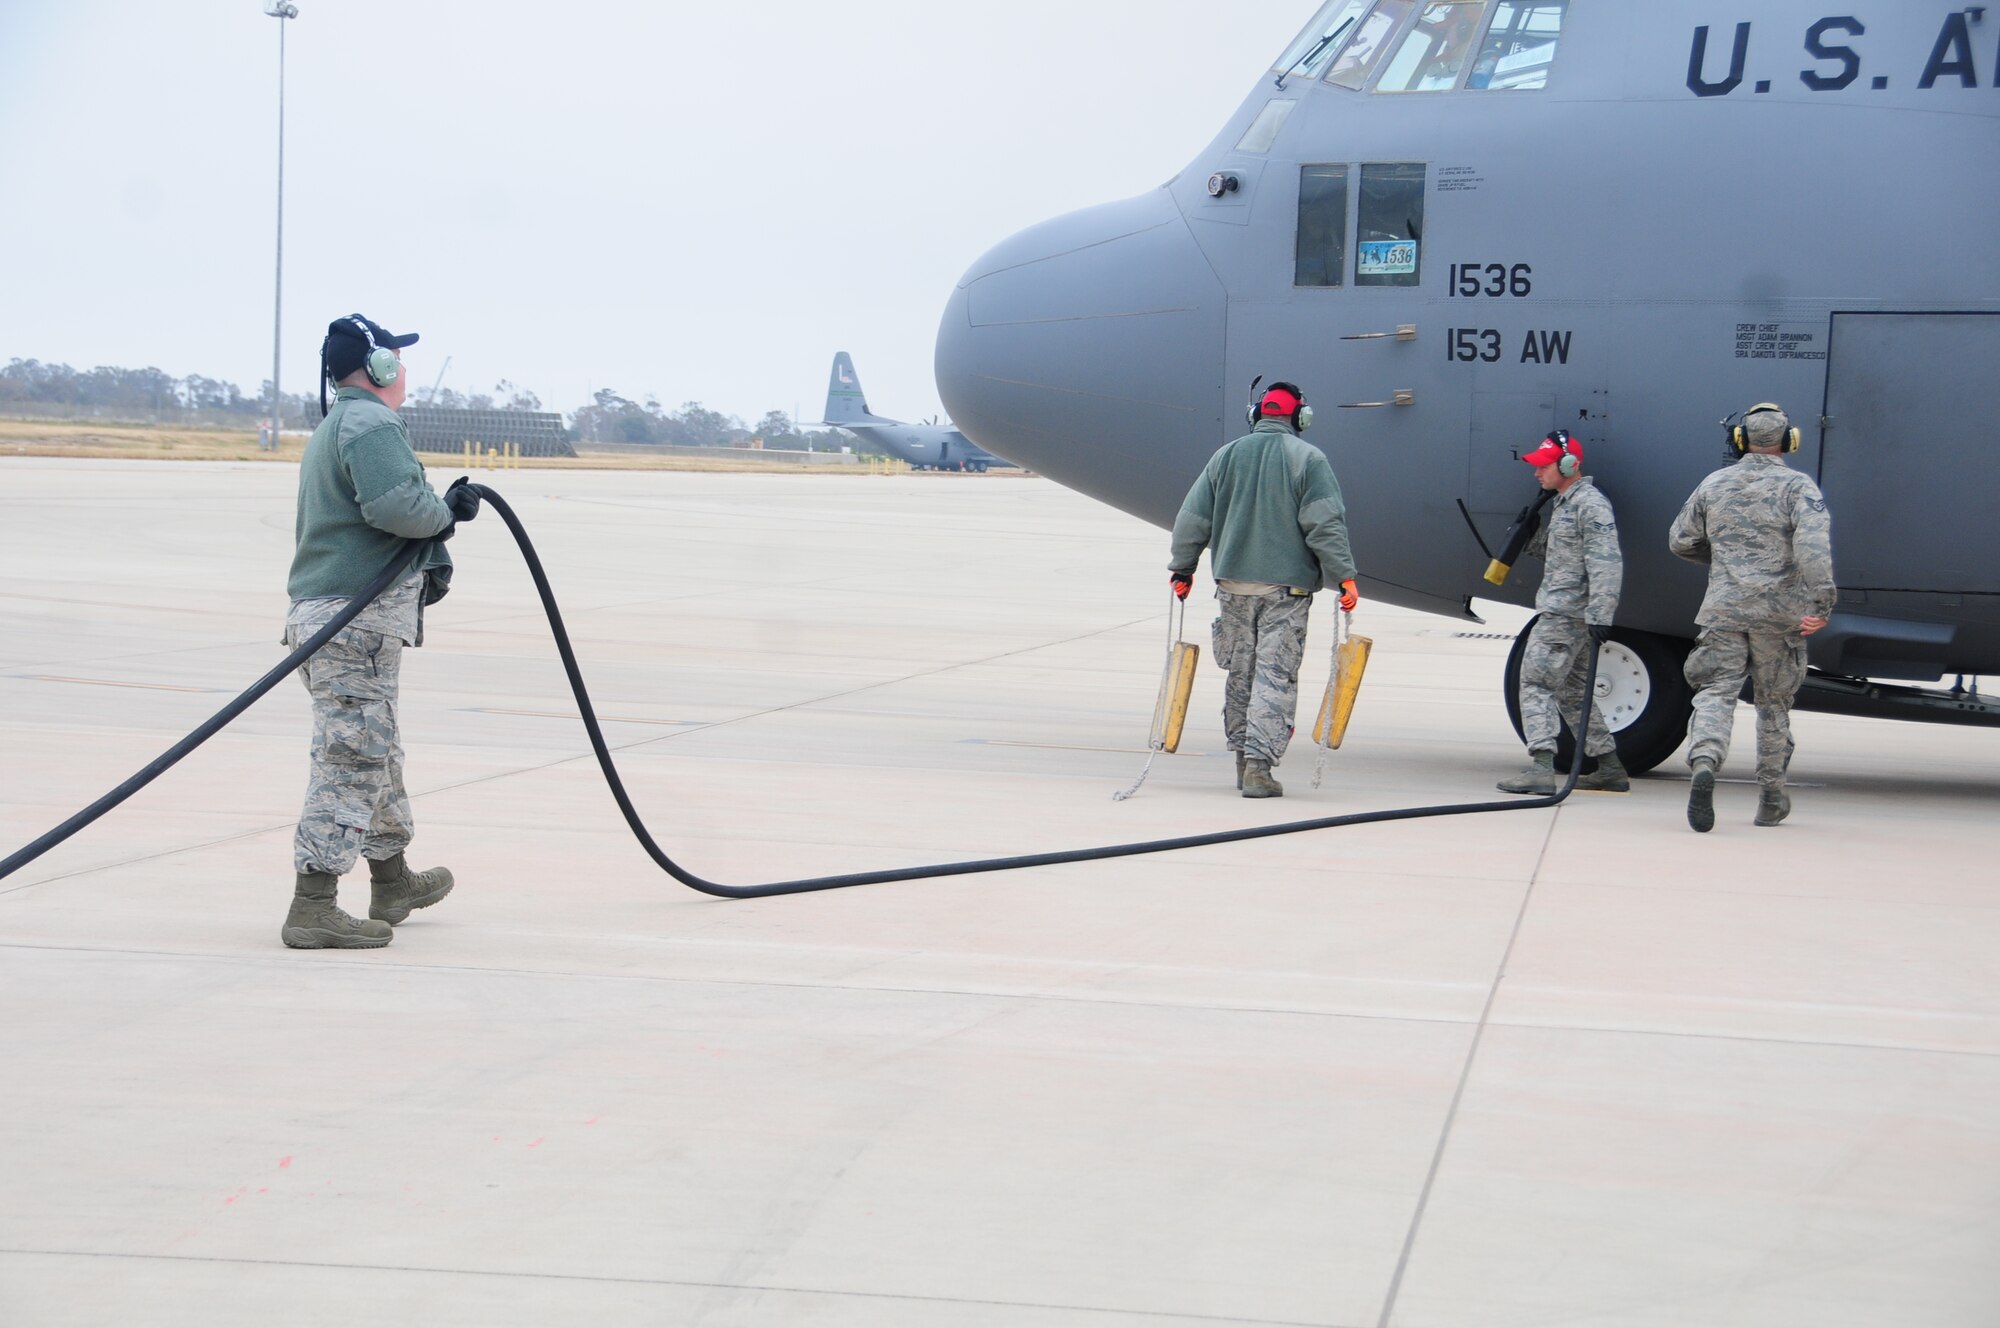 U.S. Air National Guard members from the 153rd Airlift Wing in Cheyenne, Wyoming refuel a C-130 during wildland firefighting training at the 146th Airlift Wing in Port Hueneme California on May 4, 2016. Air National Guard and Reserve units from across the U.S. convened for MAFFS (Modular Airborne Fire Fighting Systems)annual certification and training this week to prepare for the upcoming fire season in support of U.S. Forest Service. (U.S. Air National Guard photo by Senior Airman Madeleine Richards/Released)


